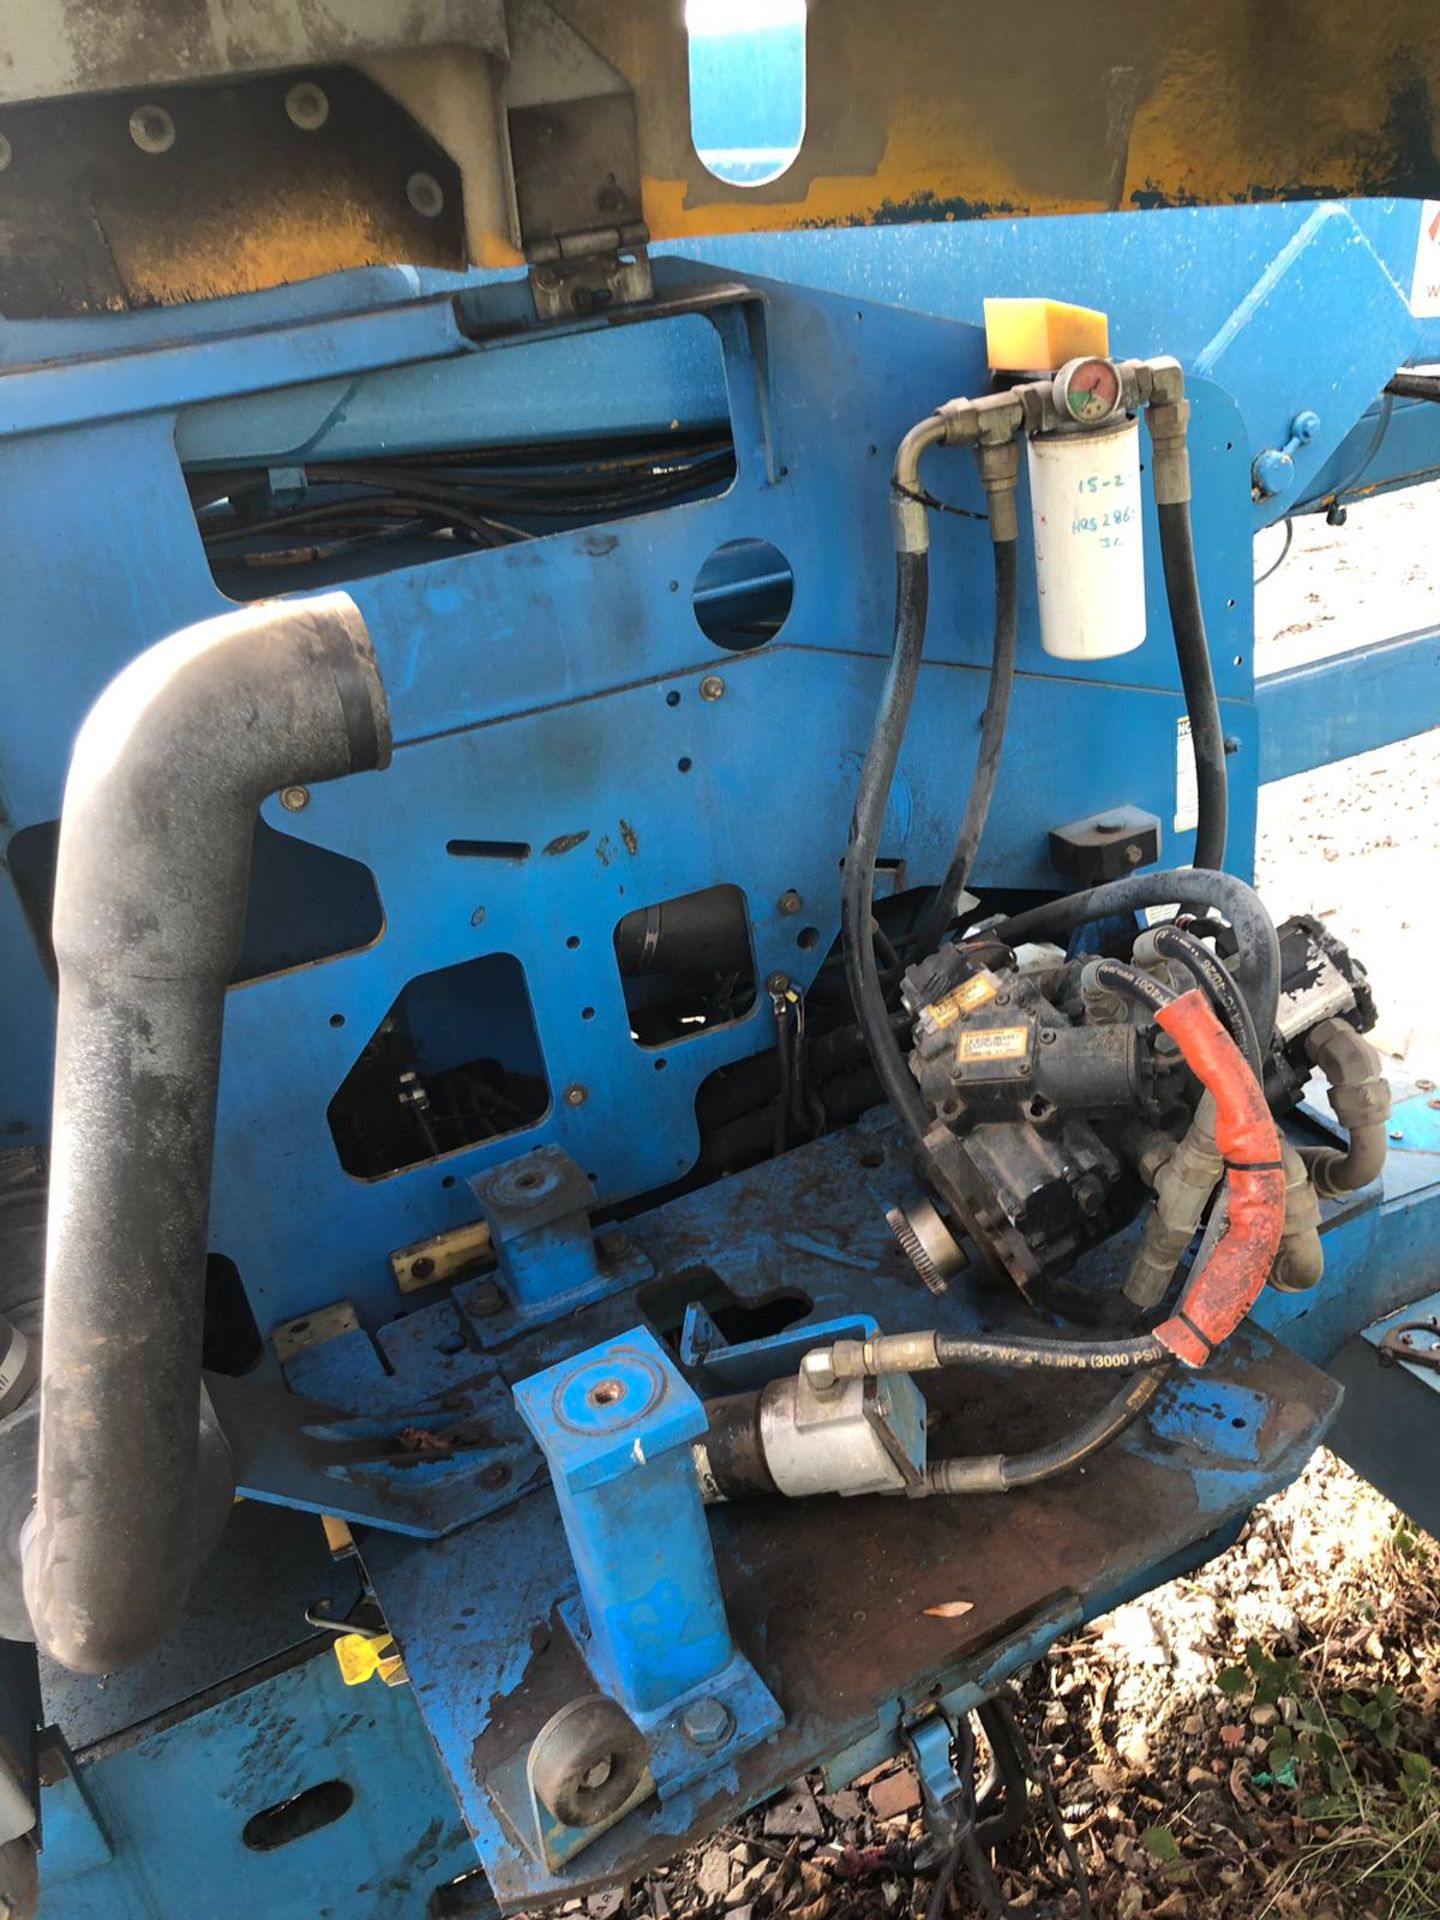 TWO 2 X GENIE BOOM LIFTS MODEL Z45 - 25J 4X4, YEAR 2001 SELLING AS SPARES / REPAIRS *PLUS VAT* - Image 6 of 8